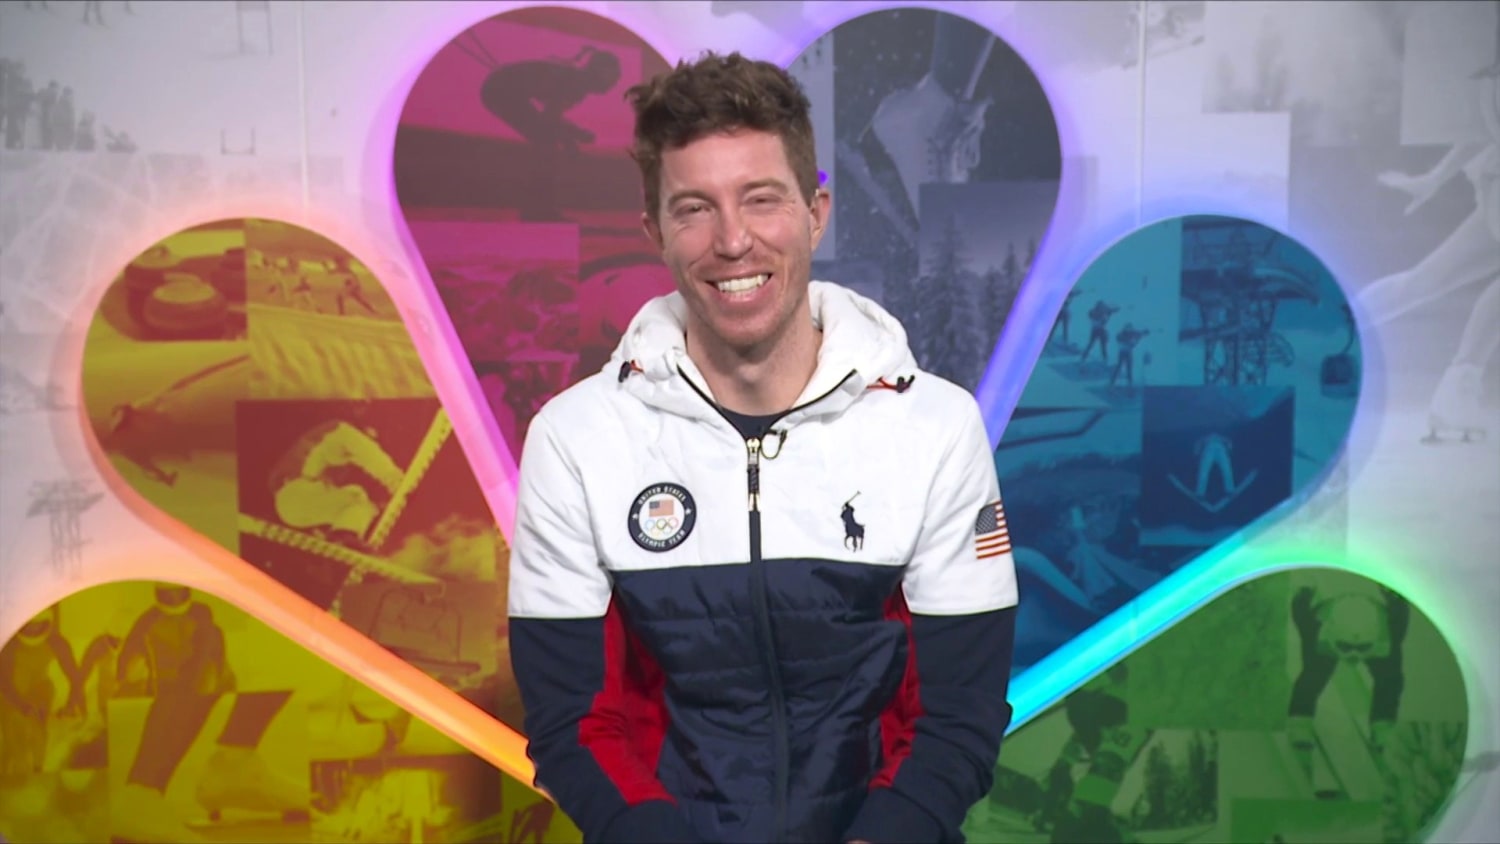 Shaun White says goodbye to snowboarding with heartfelt letter